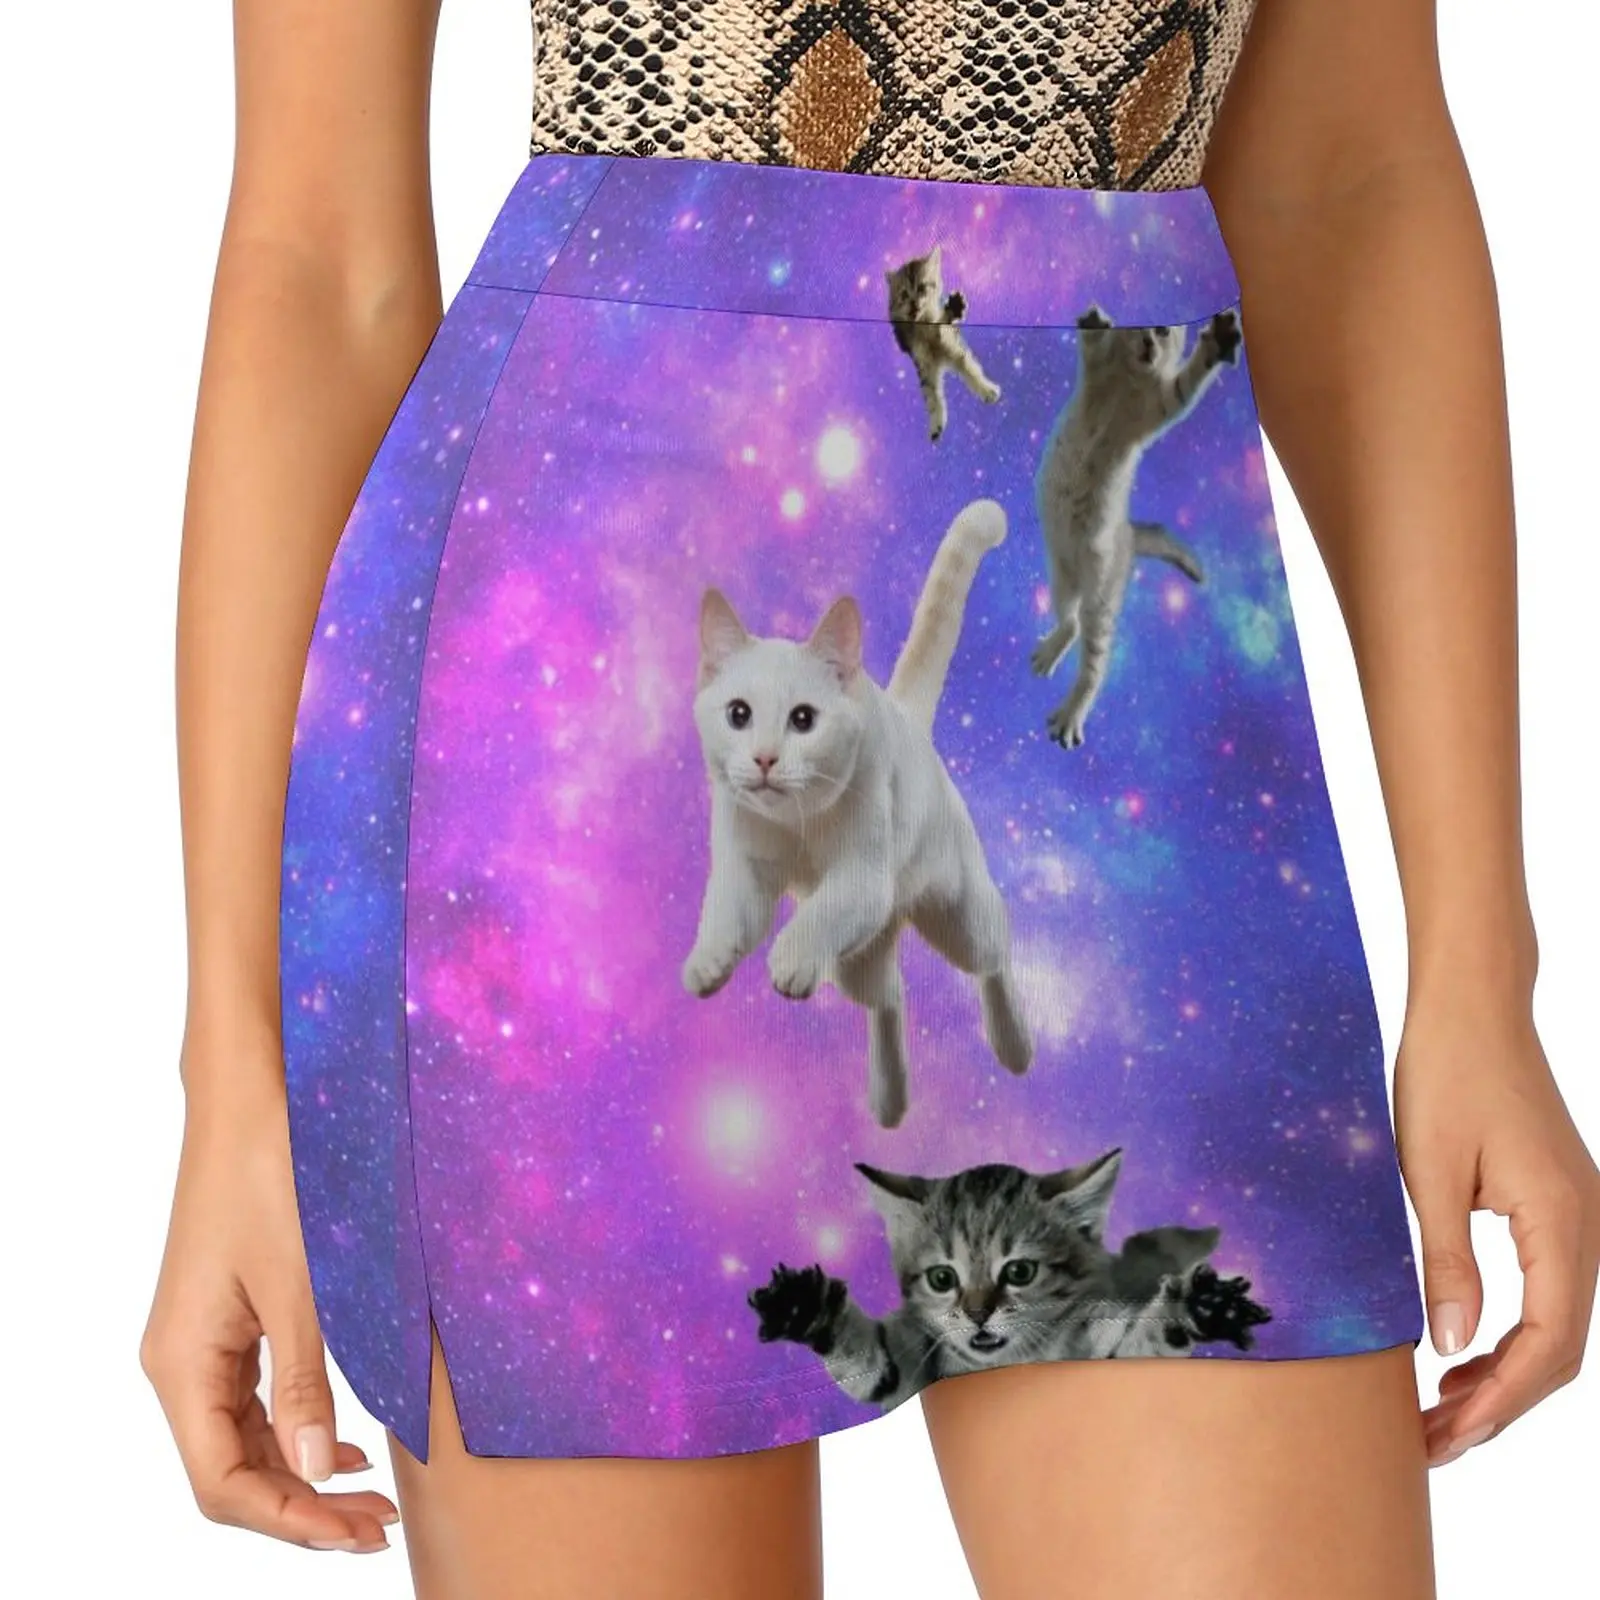 Cats in Space! Light Proof Trouser Skirt luxury evening dresses 2023 women's stylish skirts Korean skirts skirts for womens cats in colorful sunglasses light proof trouser skirt sexy mini skirt woman skirts skirts women summer 2023